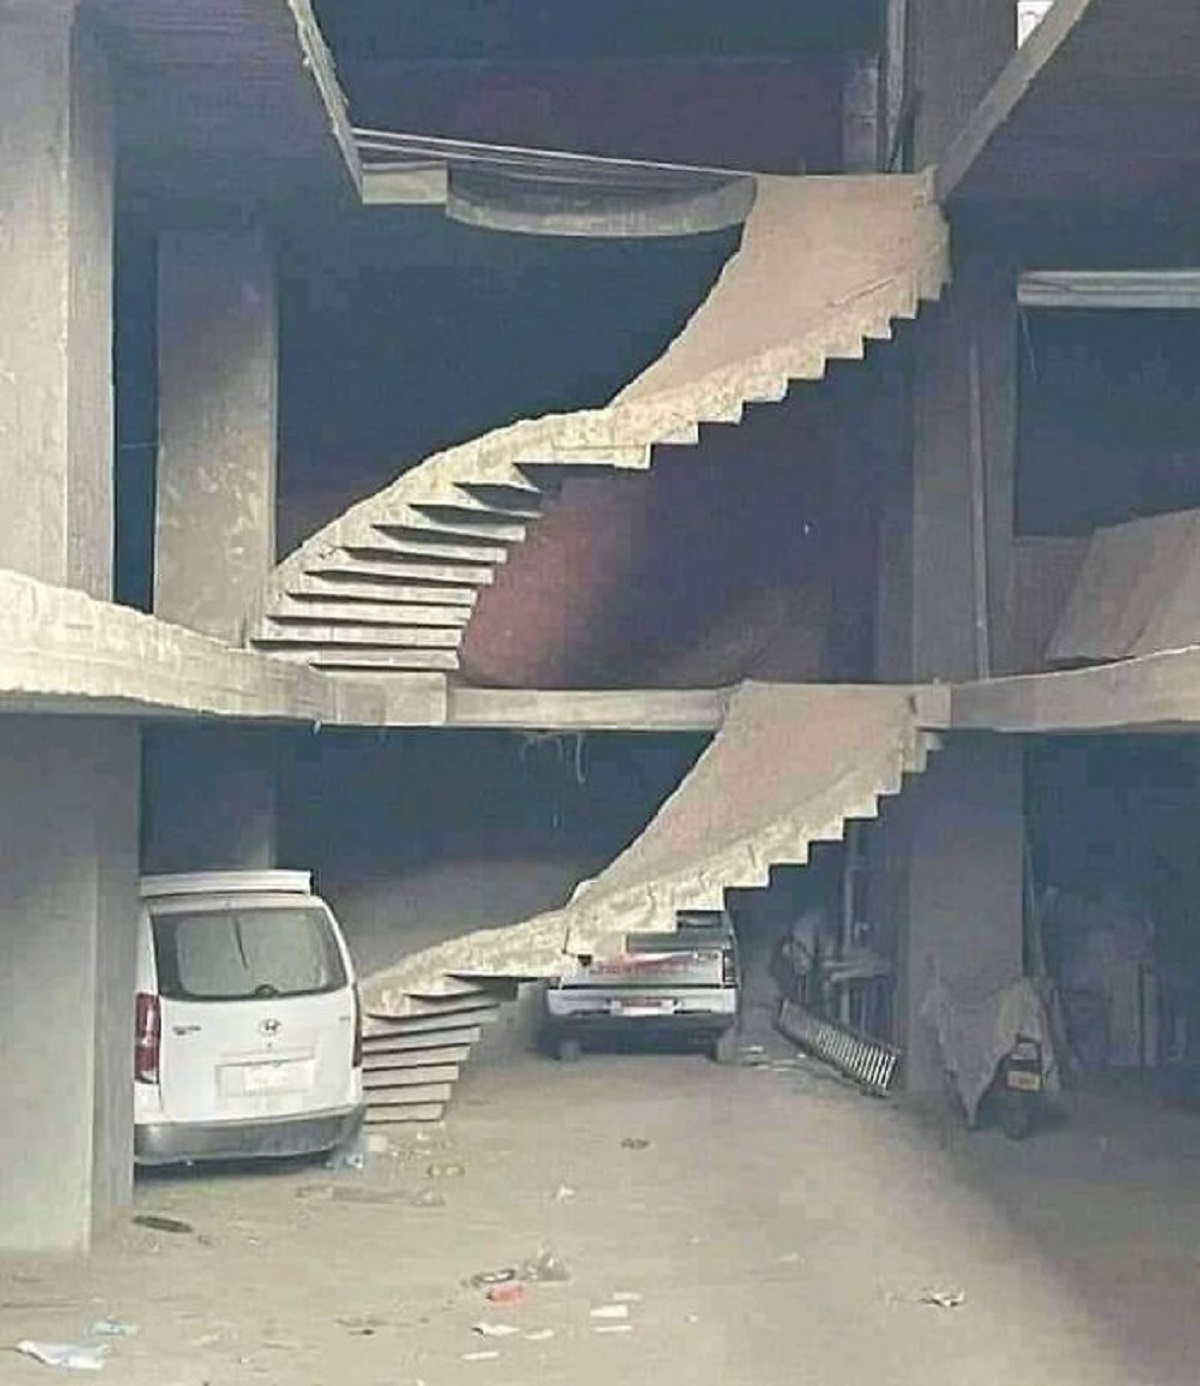 people who had one job and failed